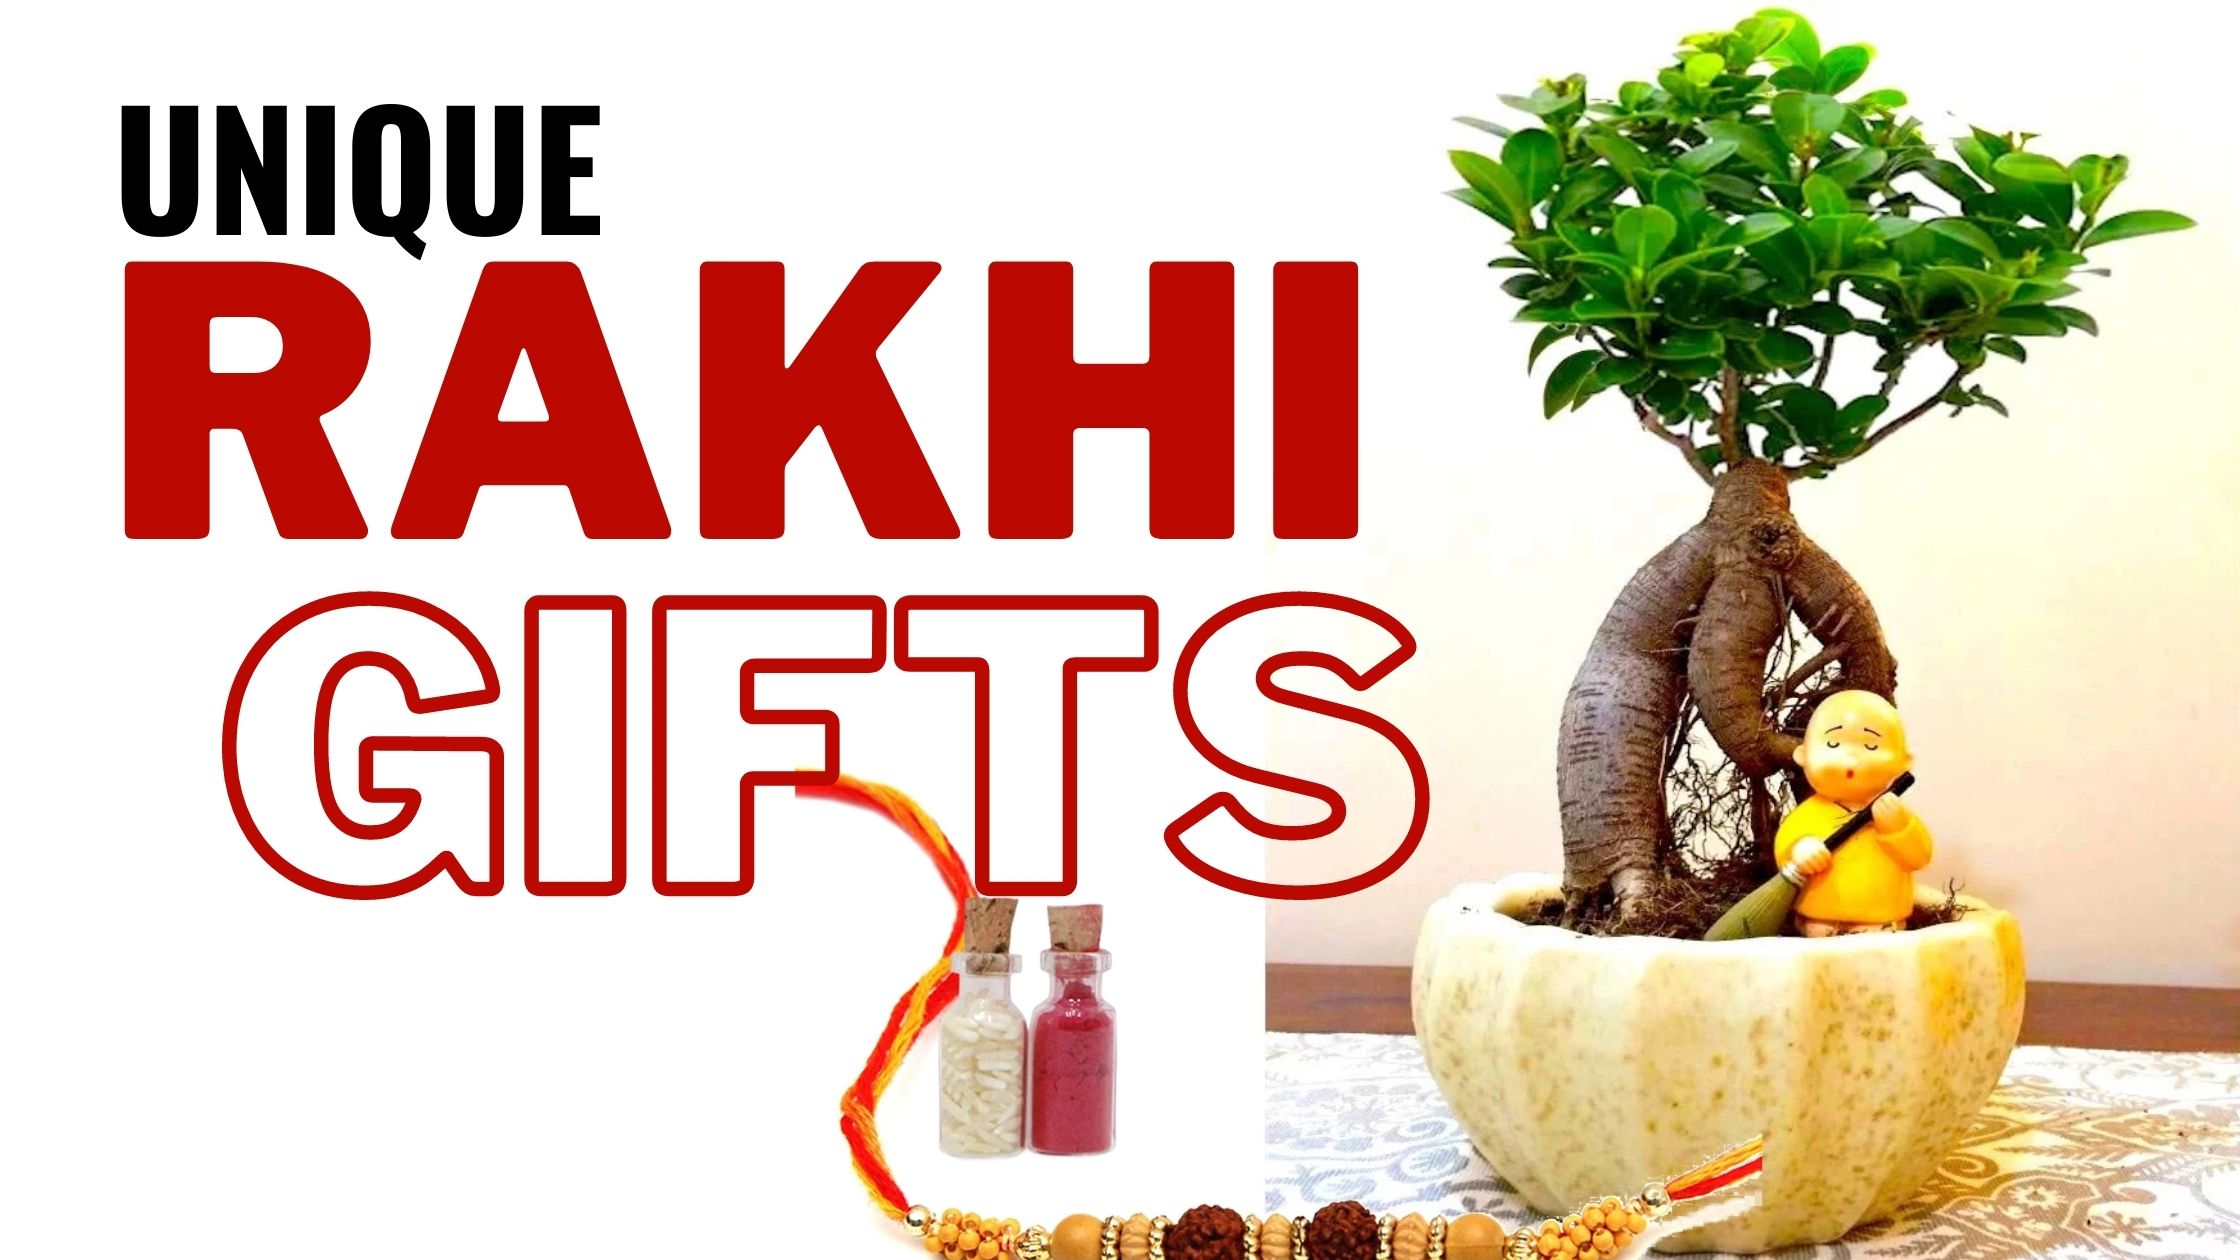 What are the Best Rakhi Gift Ideas for Sisters? - IGP Blog - Gift Ideas for  Women's Day, Birthday, Wedding & Anniversary, Personalized Gifts n More...